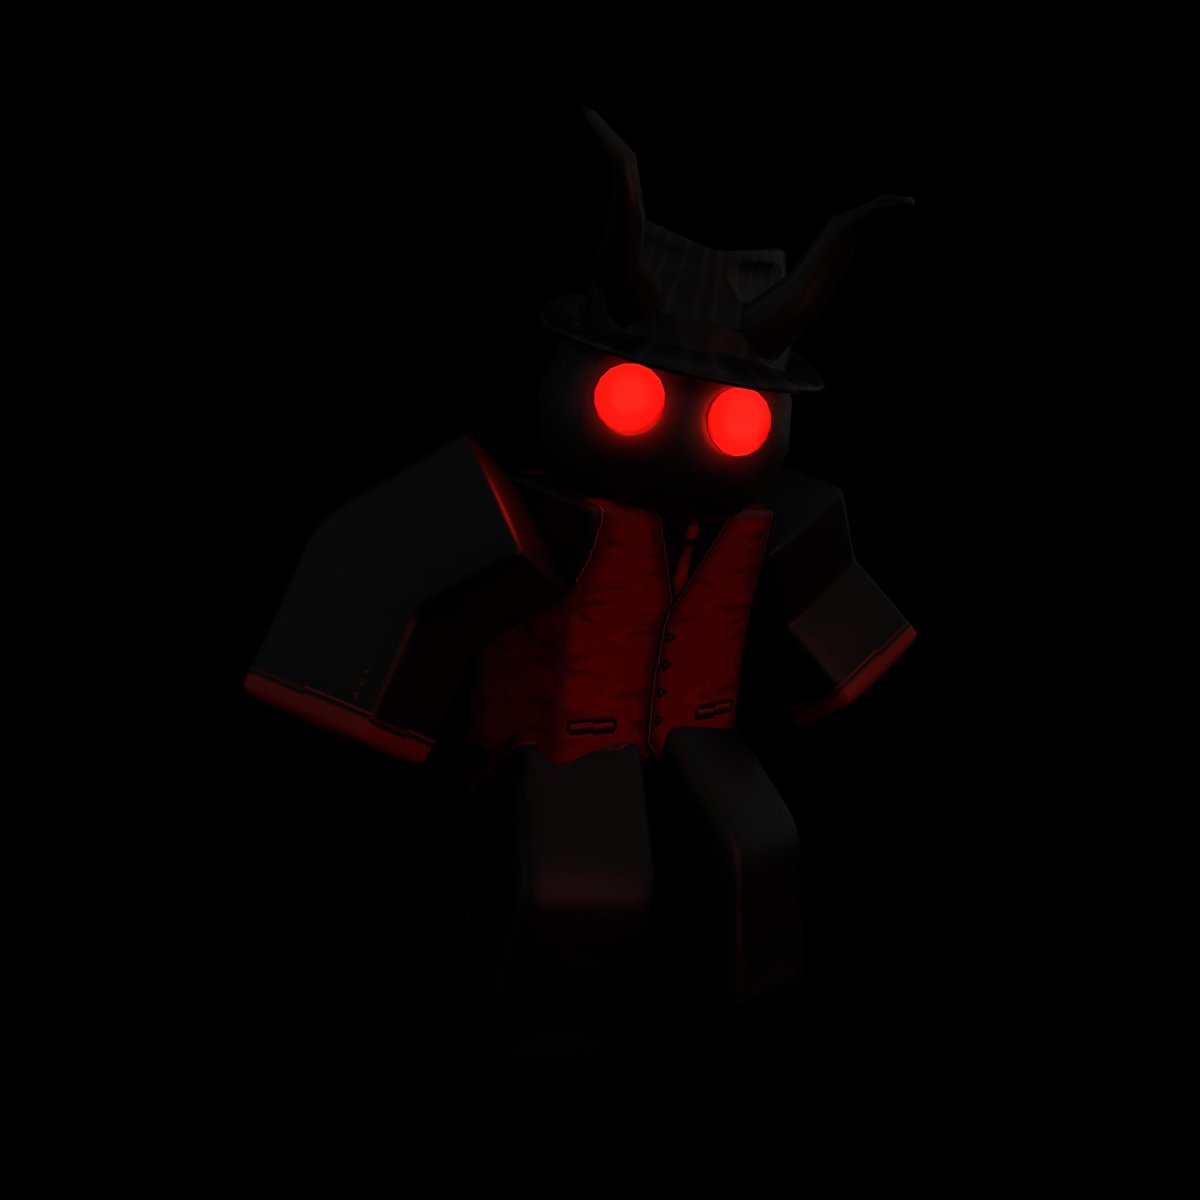 Mas On Twitter Halloween Render Giveaway 2 Winners Rules Retweet And Like Follow Obedientmas And Mudkiptdmajrbx Comment Your Favorite Roblox Hat Ends On 10 25 19 Good Luck Https